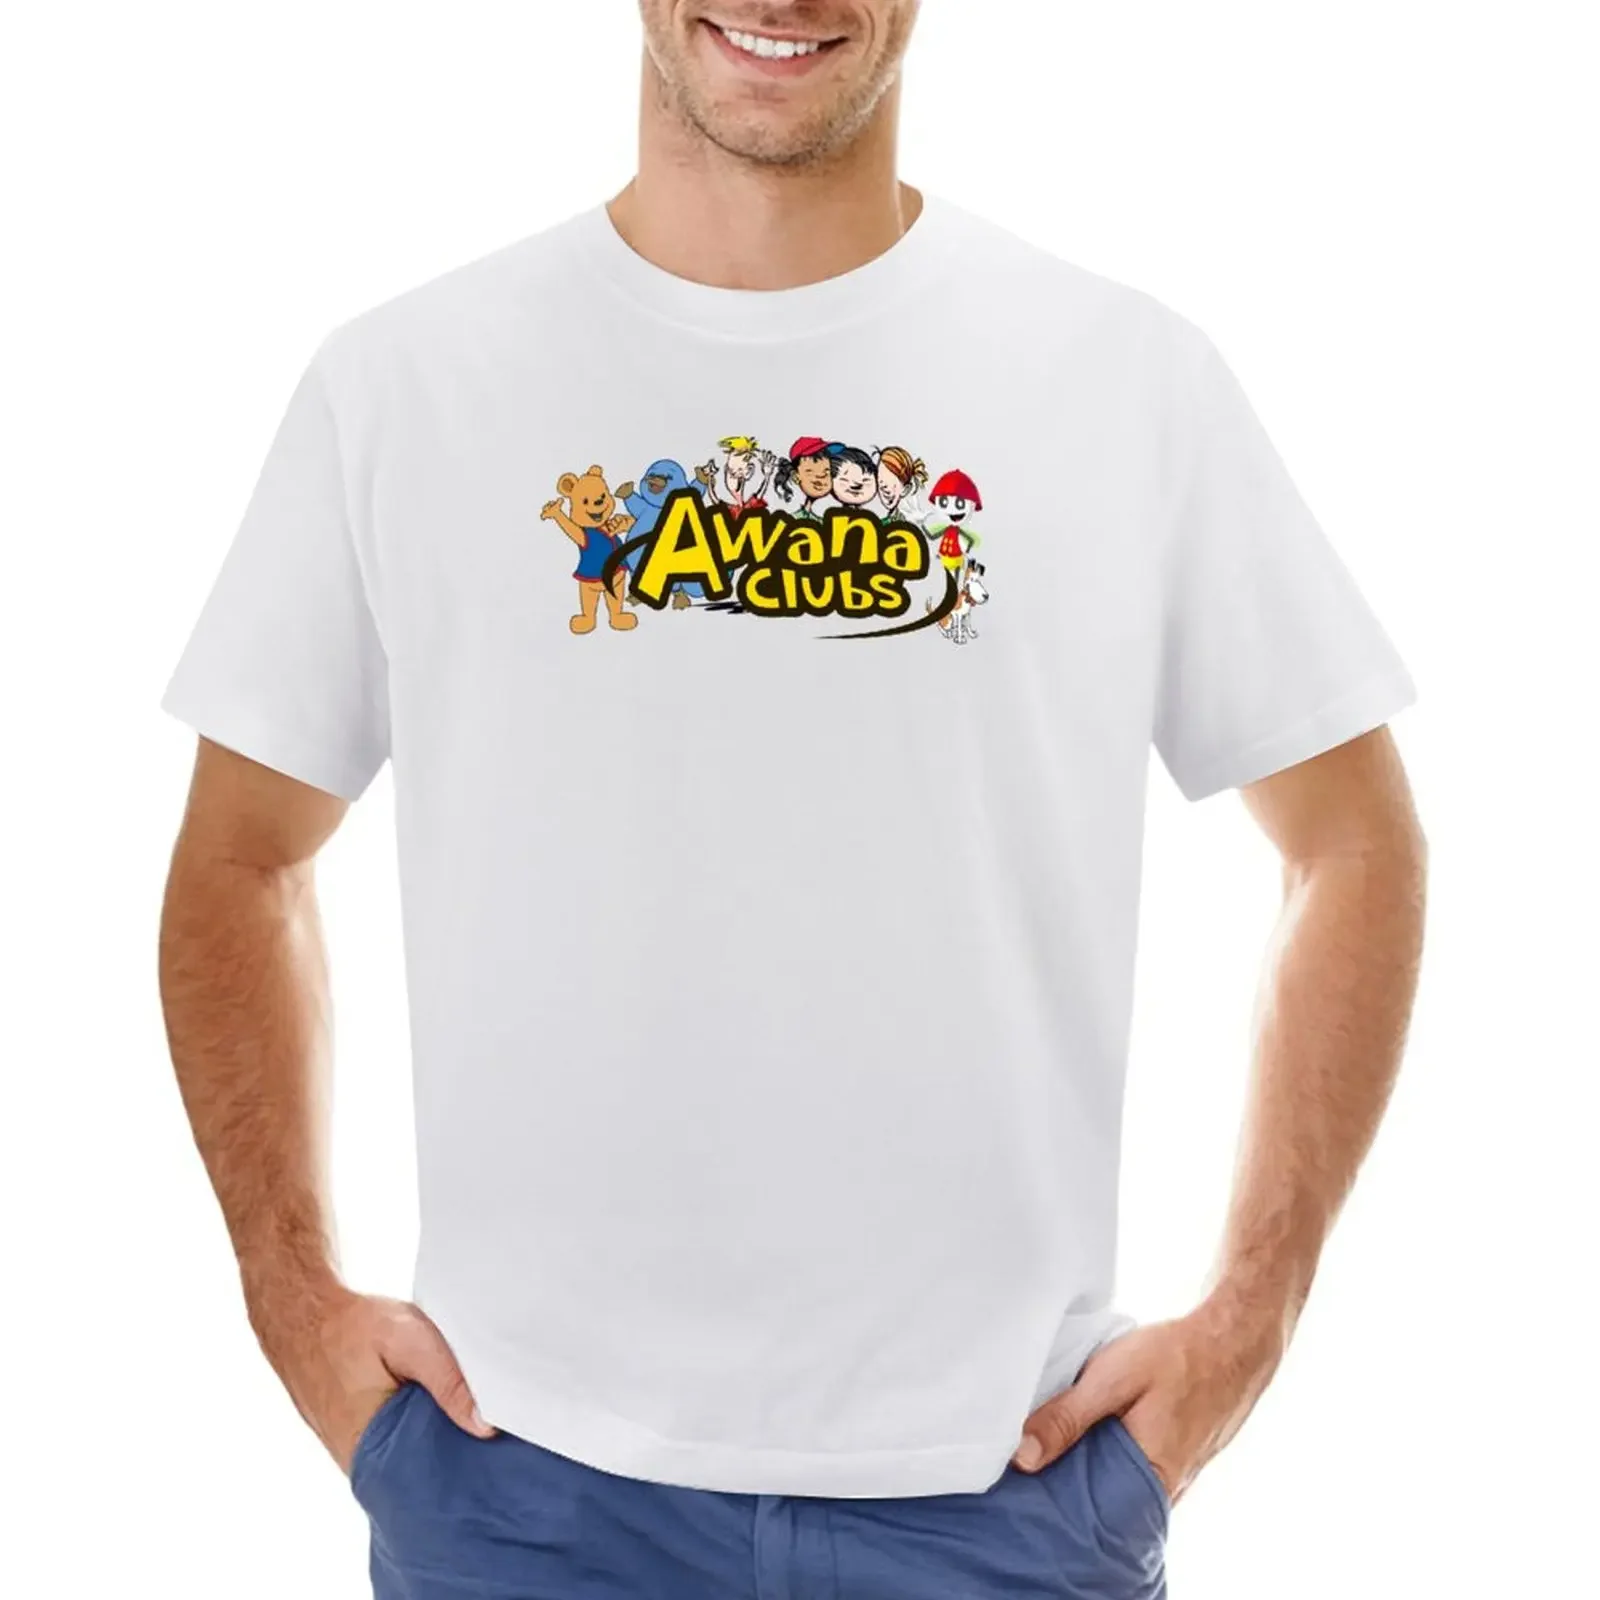 

Squad of Awana Clubs T-shirt Blouse vintage clothes t shirts for men pack